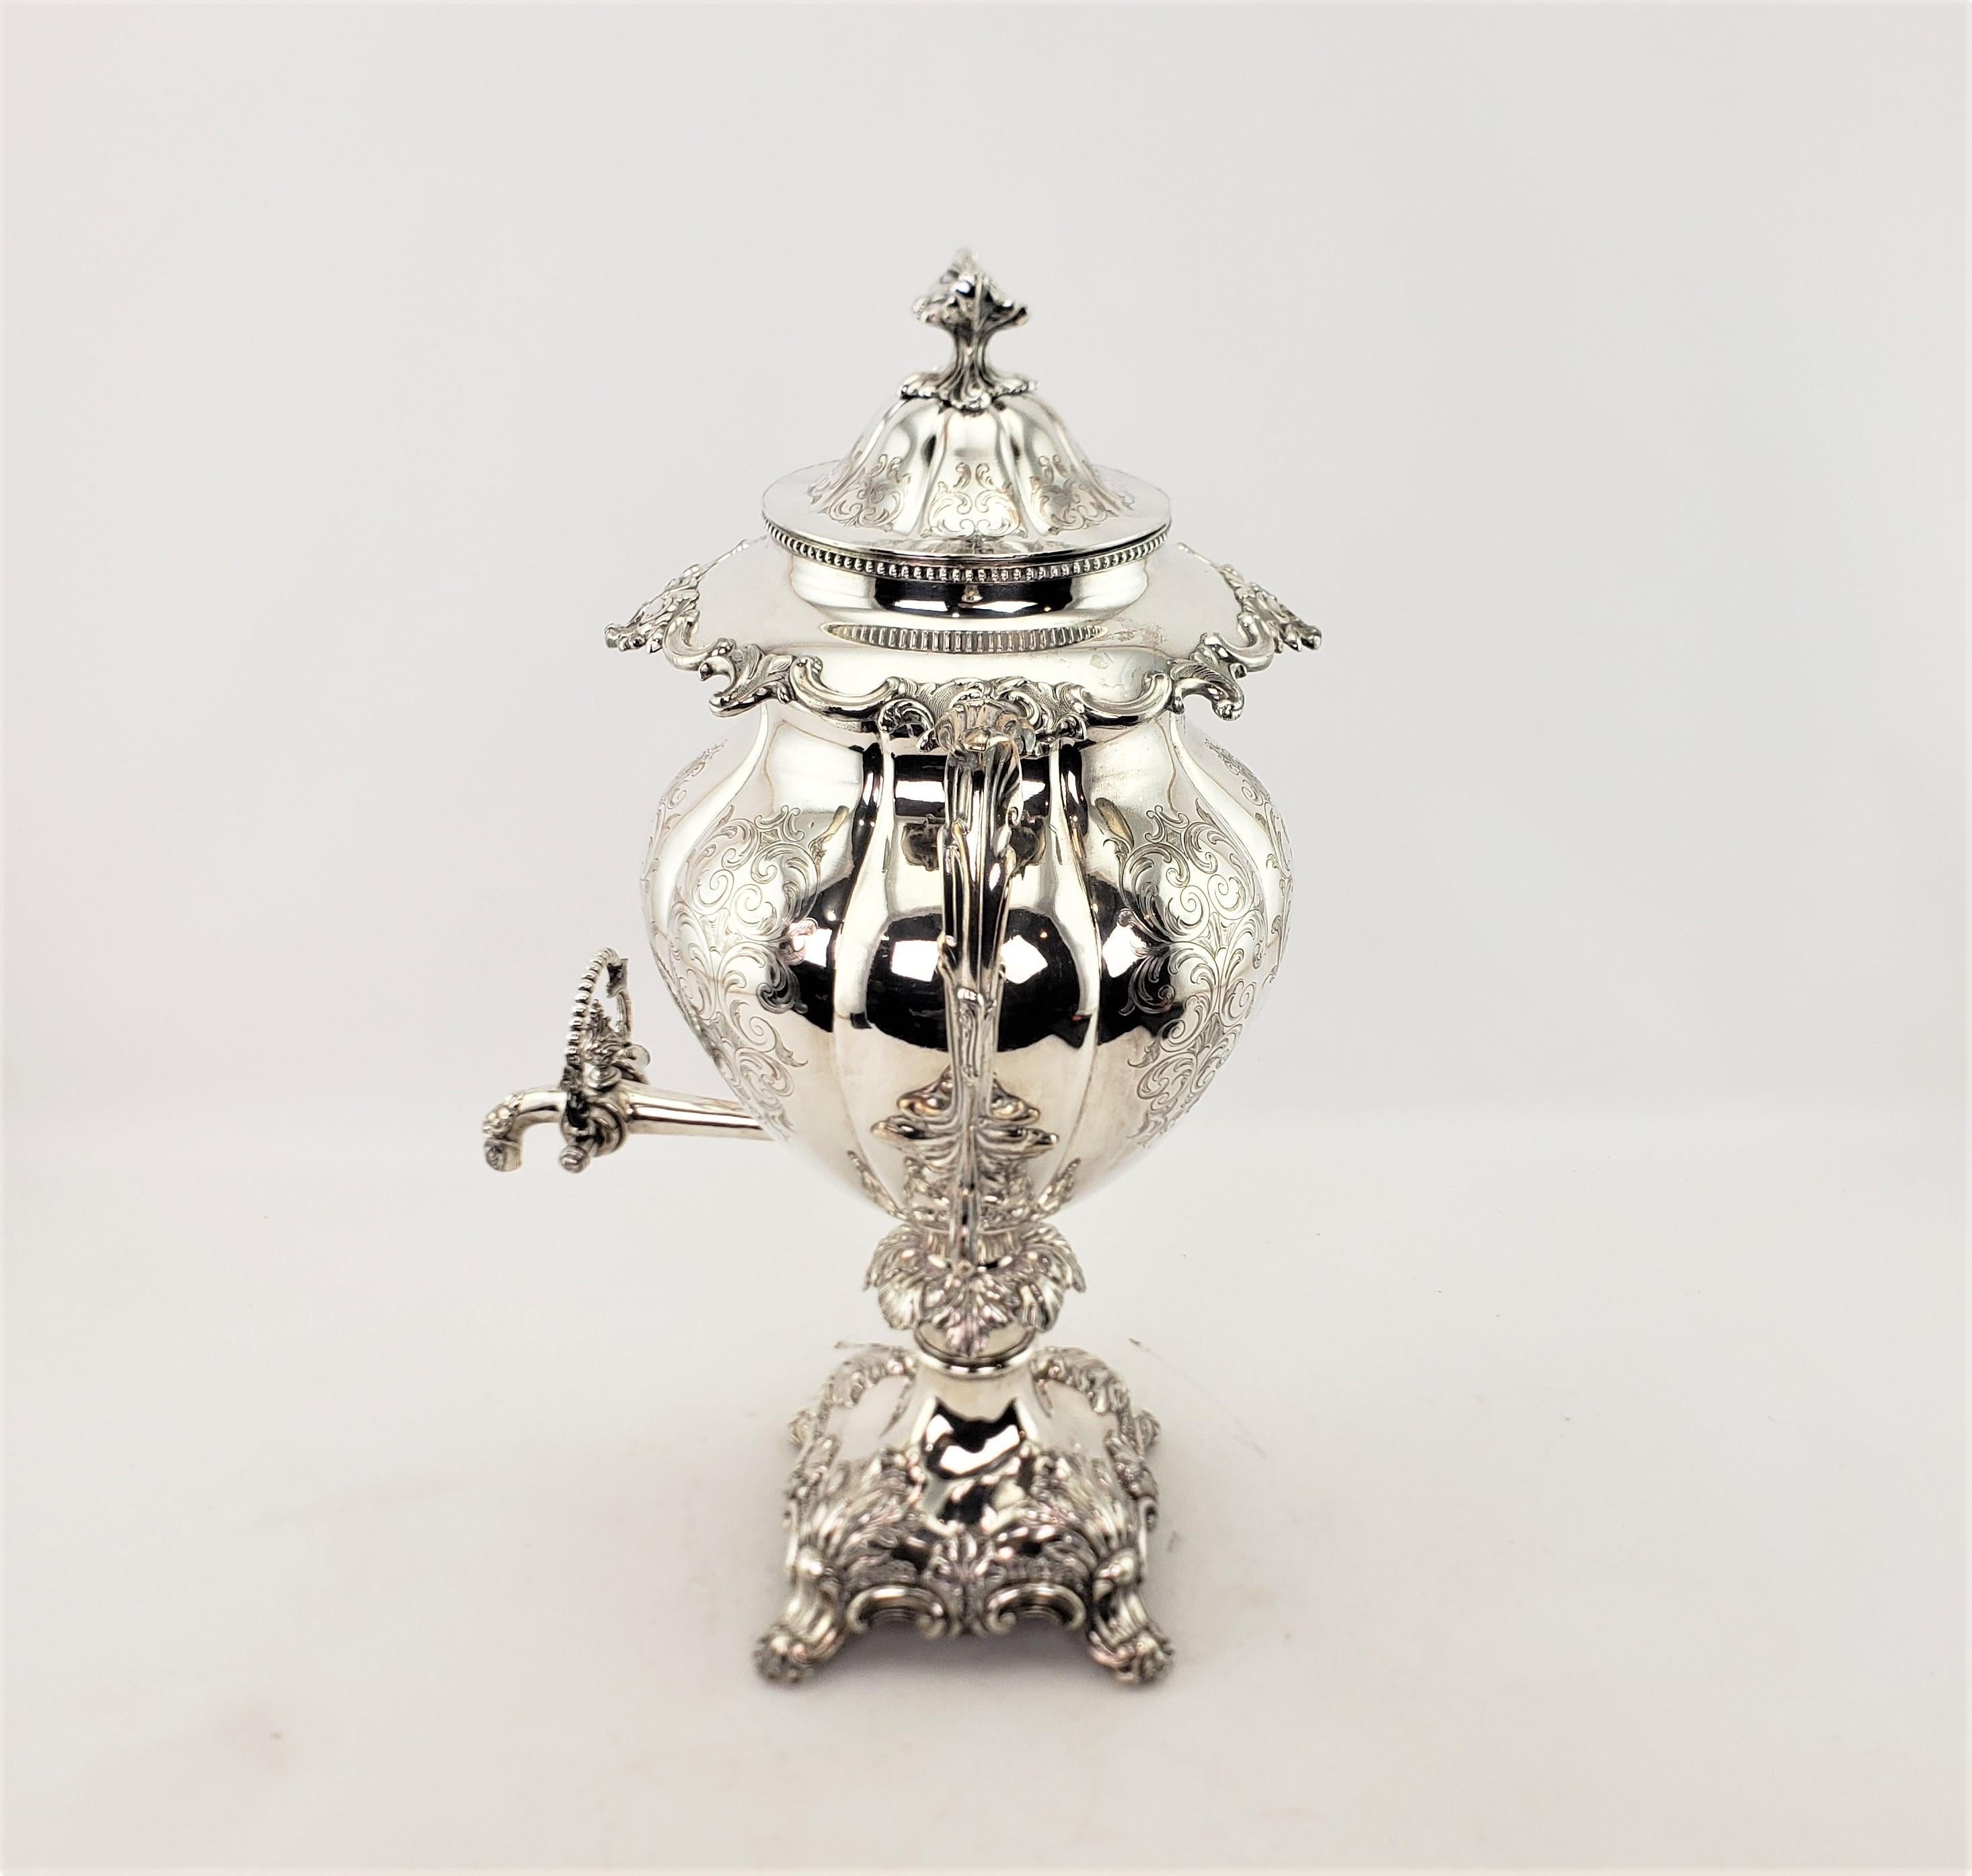 Antique Early Victorian Silver Plated Tea or Hot Water Urn with Floral Engraving In Good Condition For Sale In Hamilton, Ontario